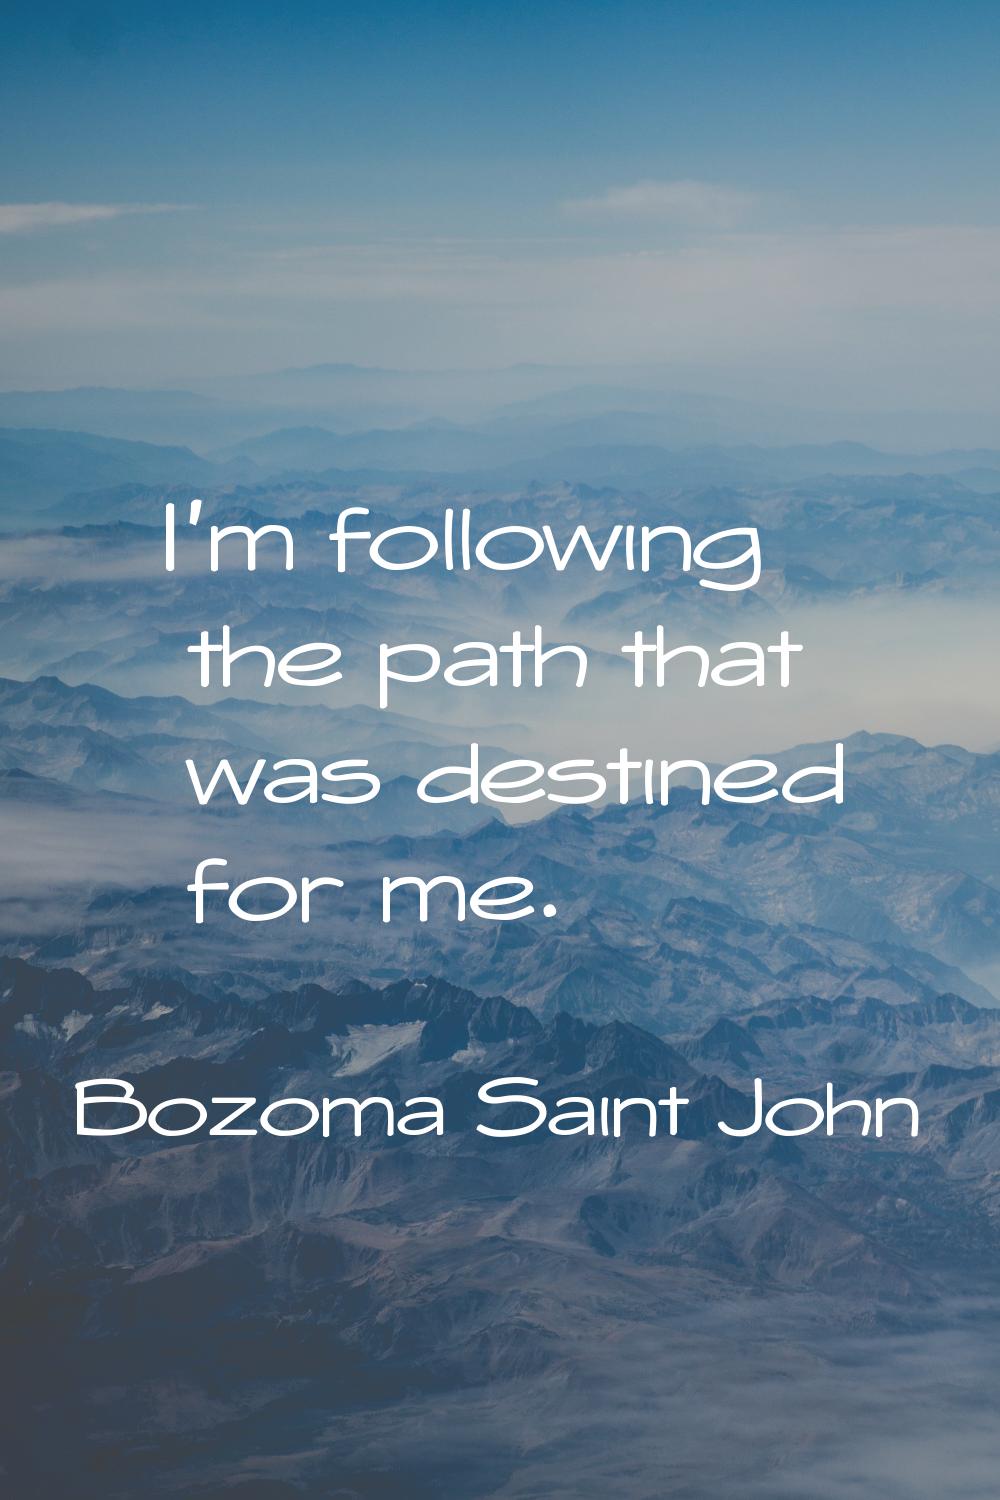 I'm following the path that was destined for me.